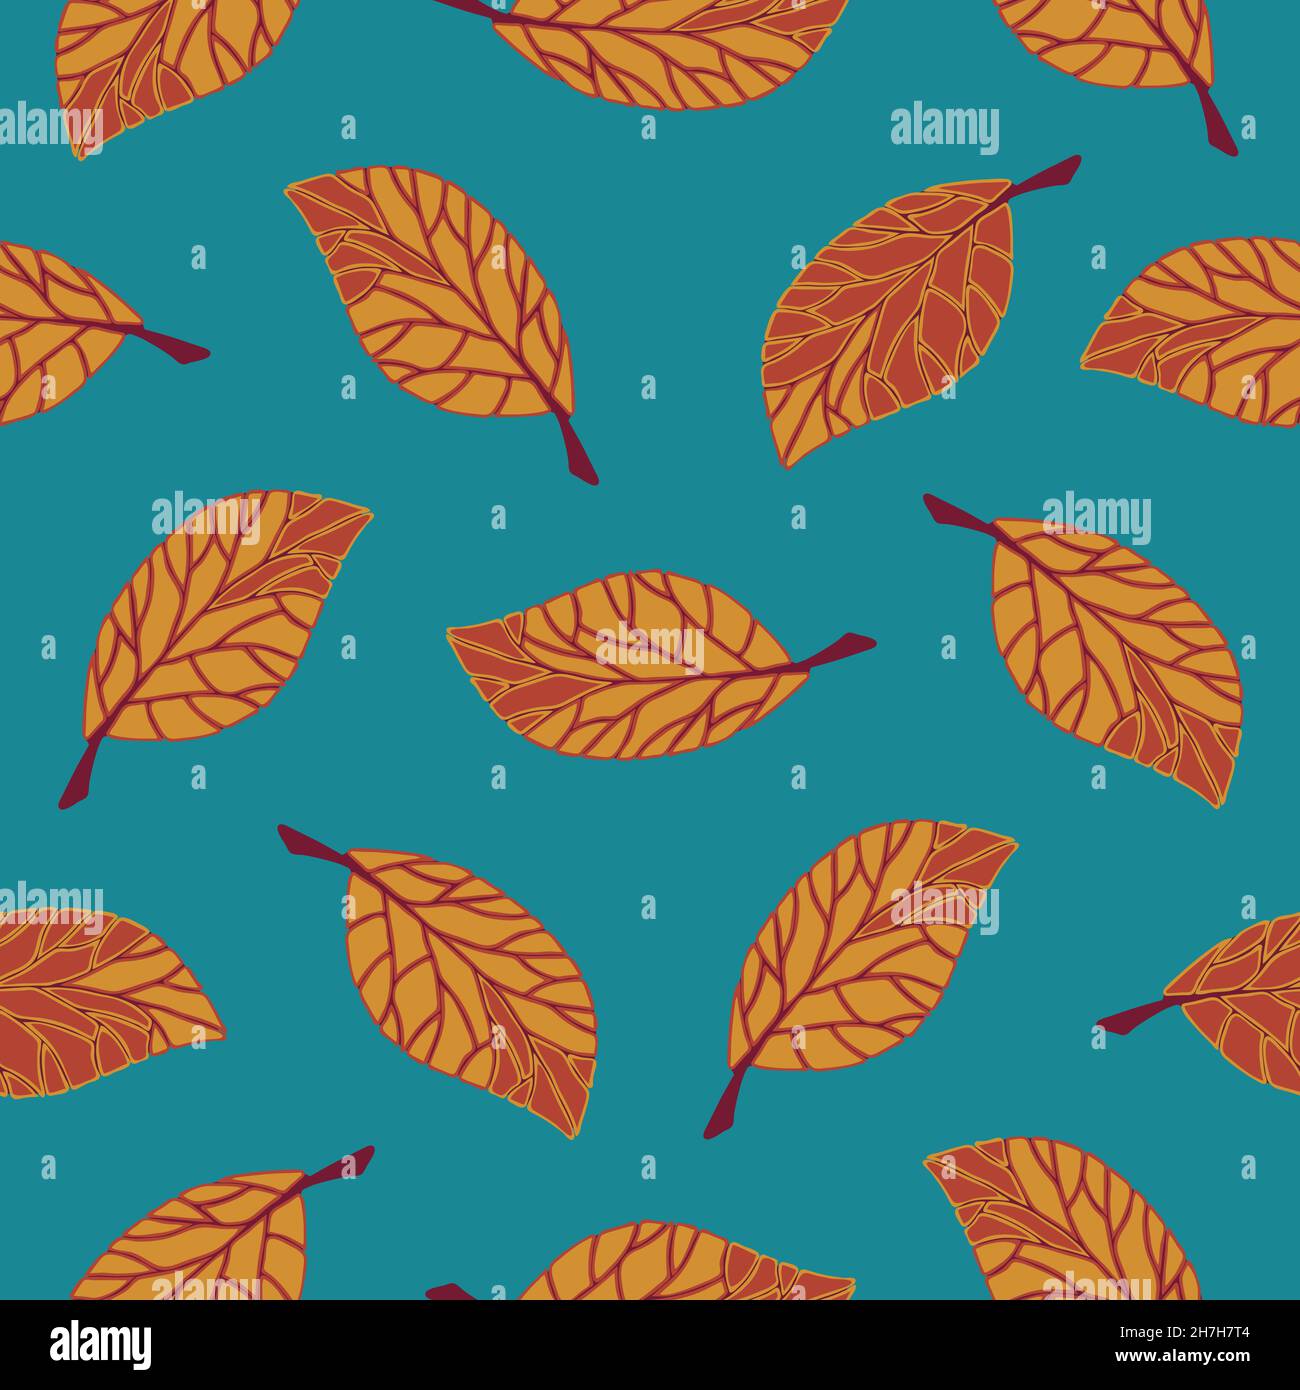 Seamless vector pattern with falling leaves on teal blue background. Simple bright autumn wallpaper design. Decorative modern forest fashion textile. Stock Vector